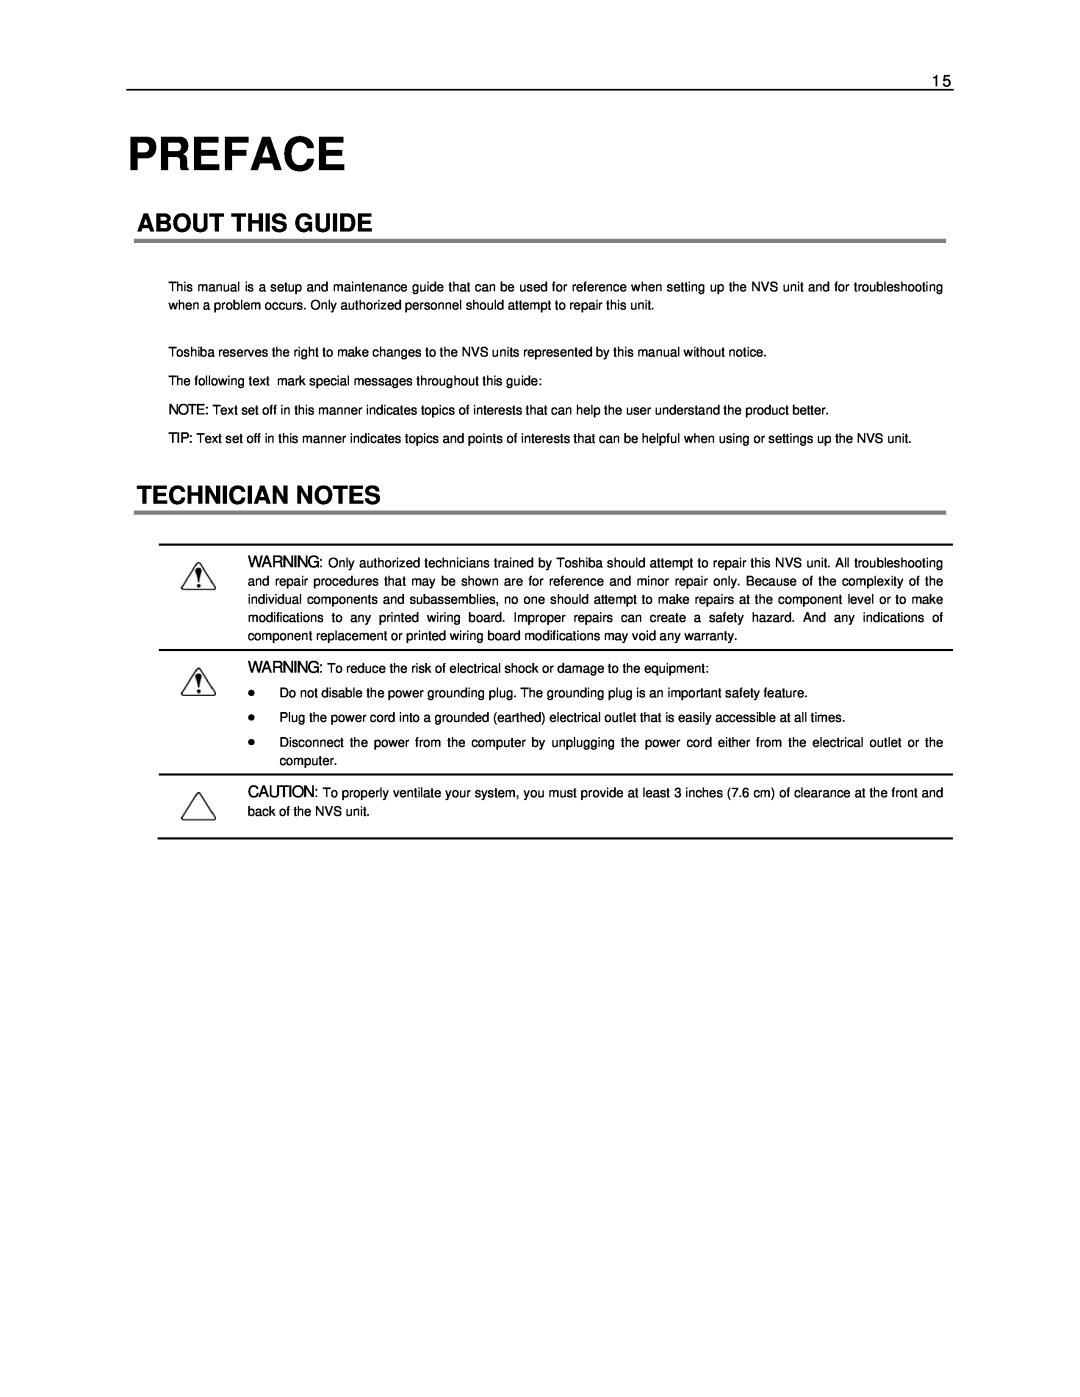 Toshiba NVS32-X, NVS16-X, NVS8-X user manual Preface, About This Guide, Technician Notes 